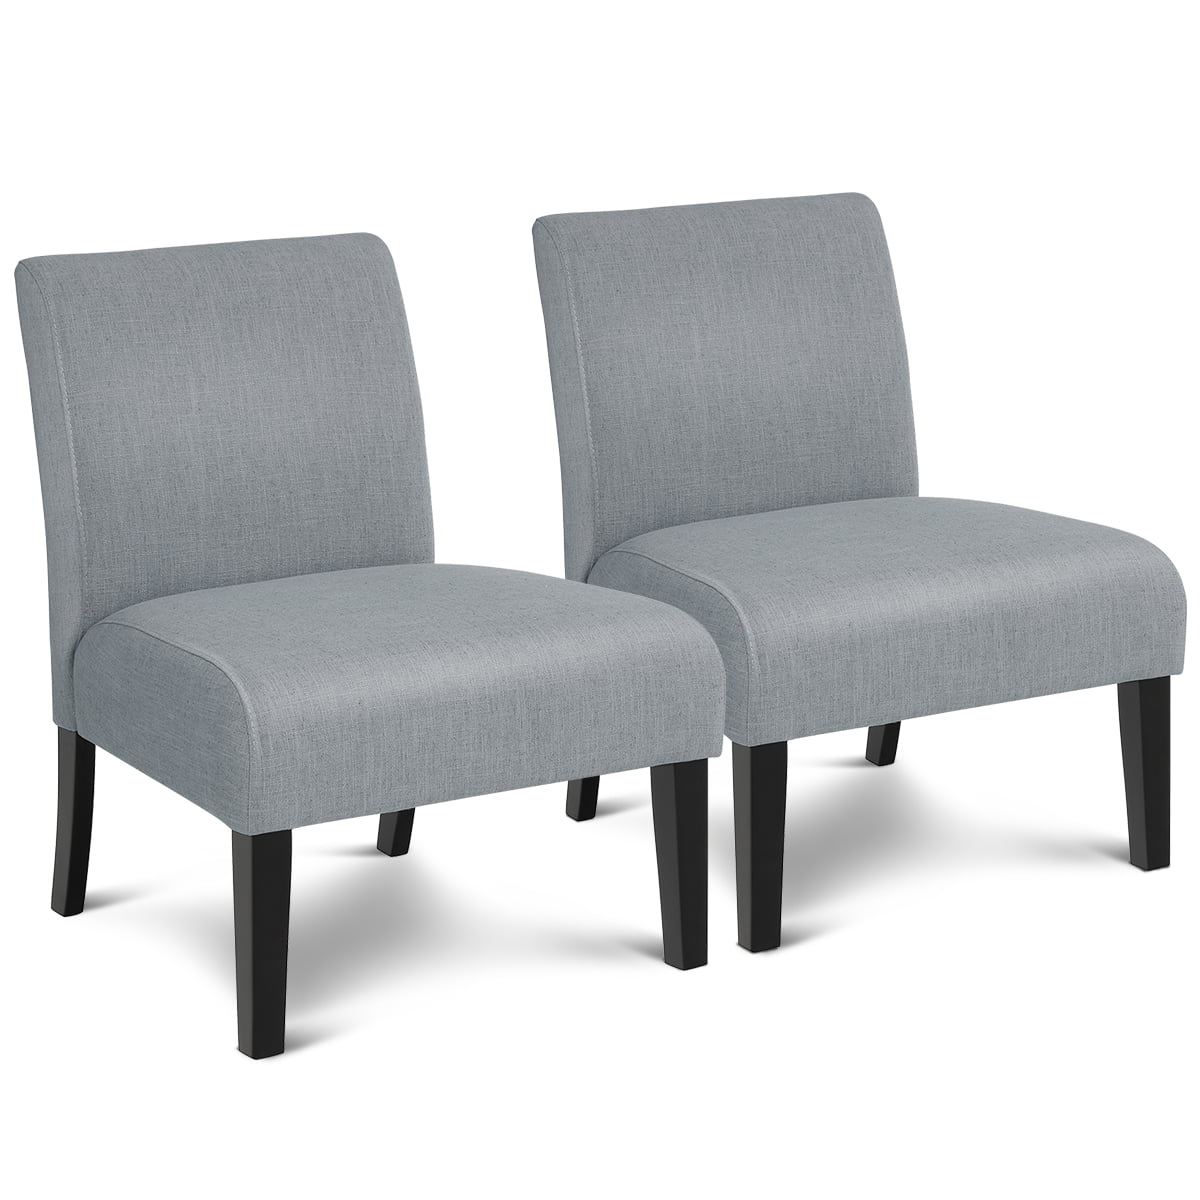  Accent Chairs Set Of 2 Grey for Small Space